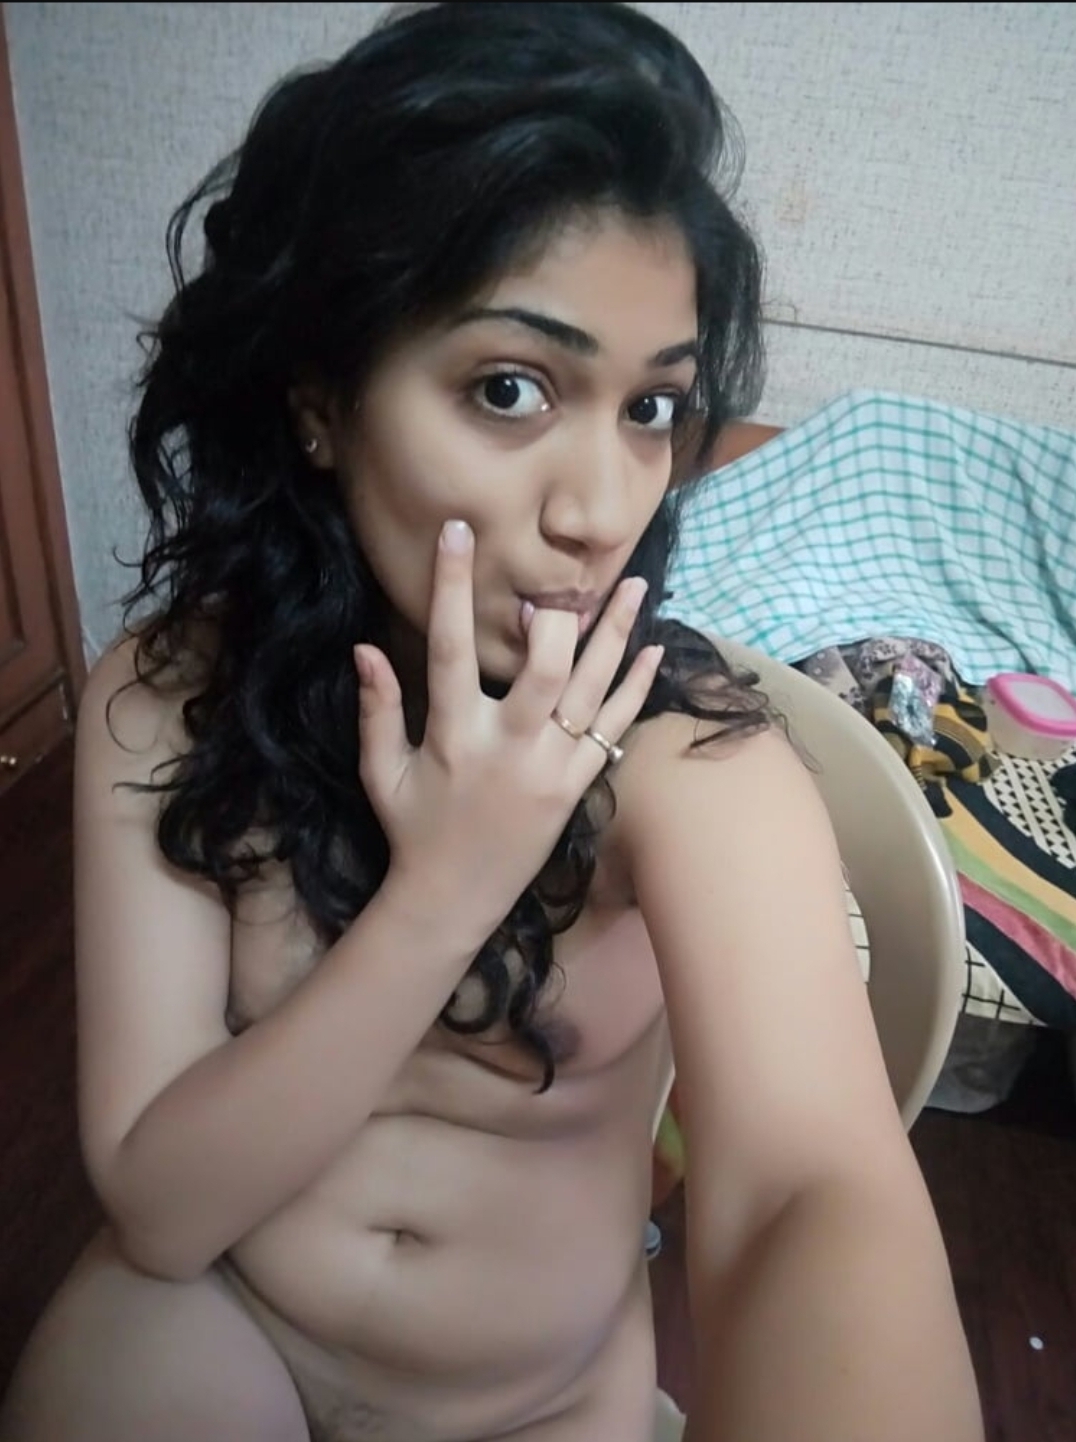 South Indian sexy girl gone nude for BF - 7cjXIufu Foto Porno - EPORNER